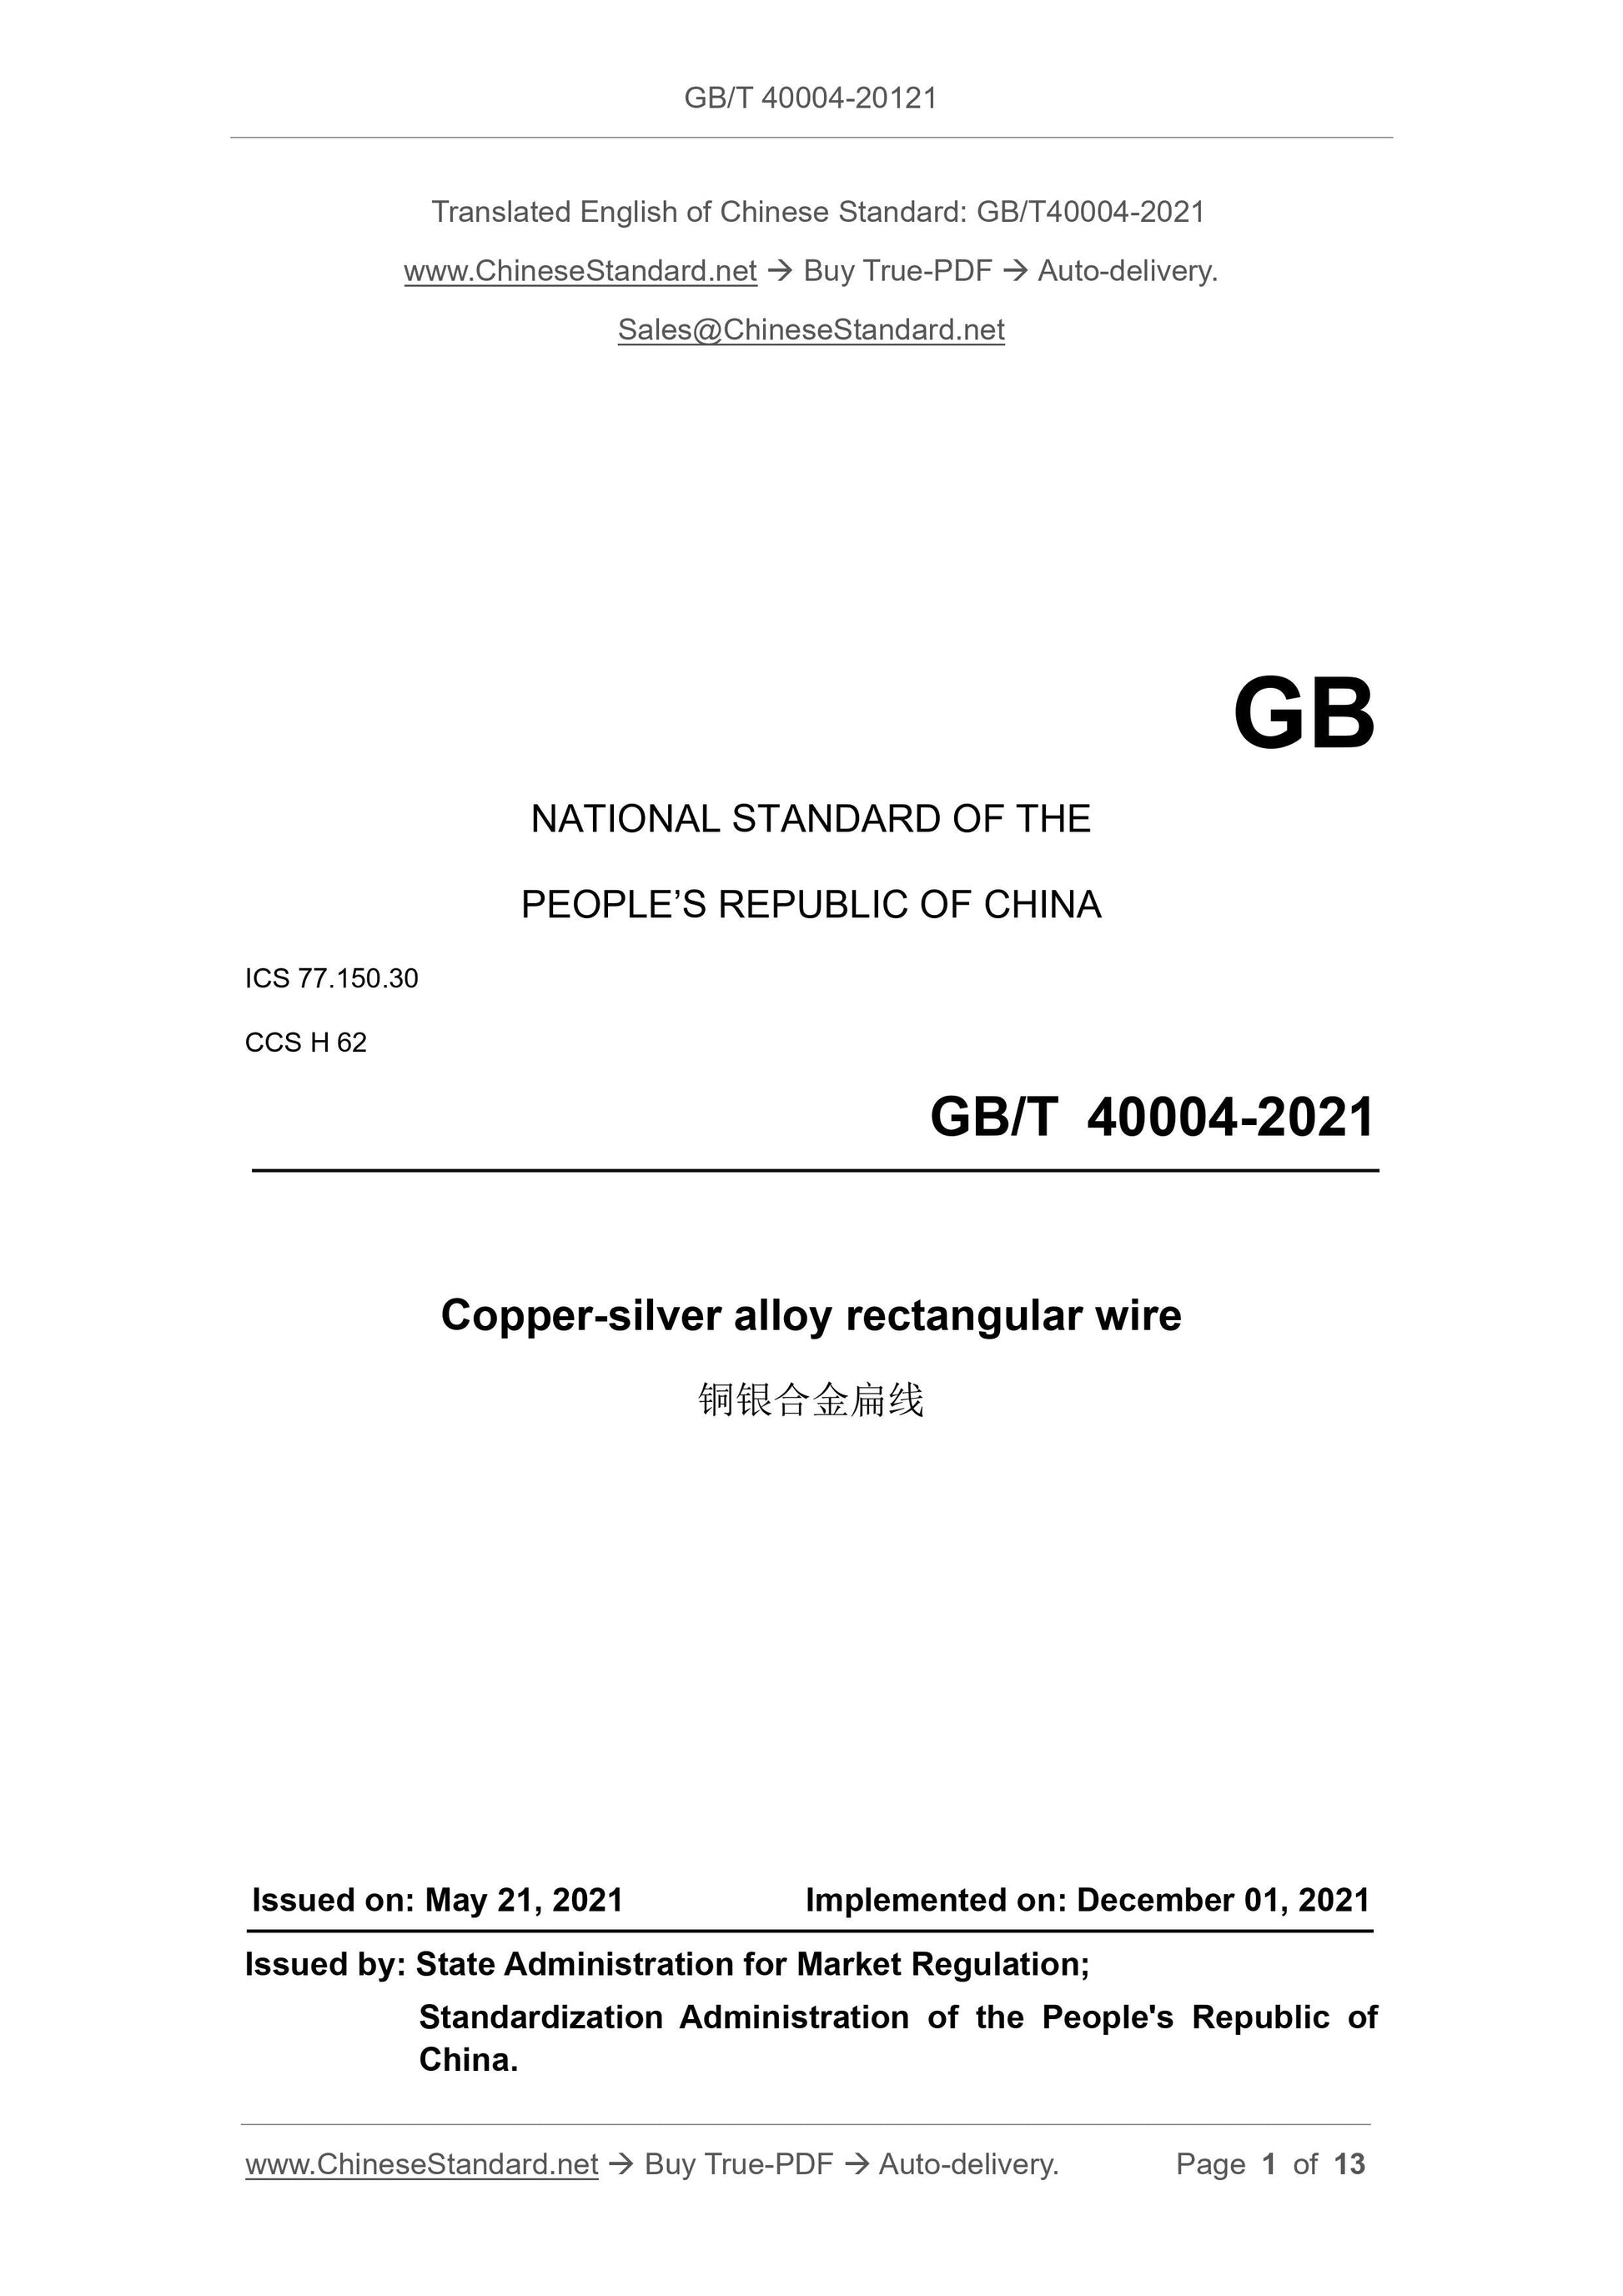 GB/T 40004-2021 Page 1